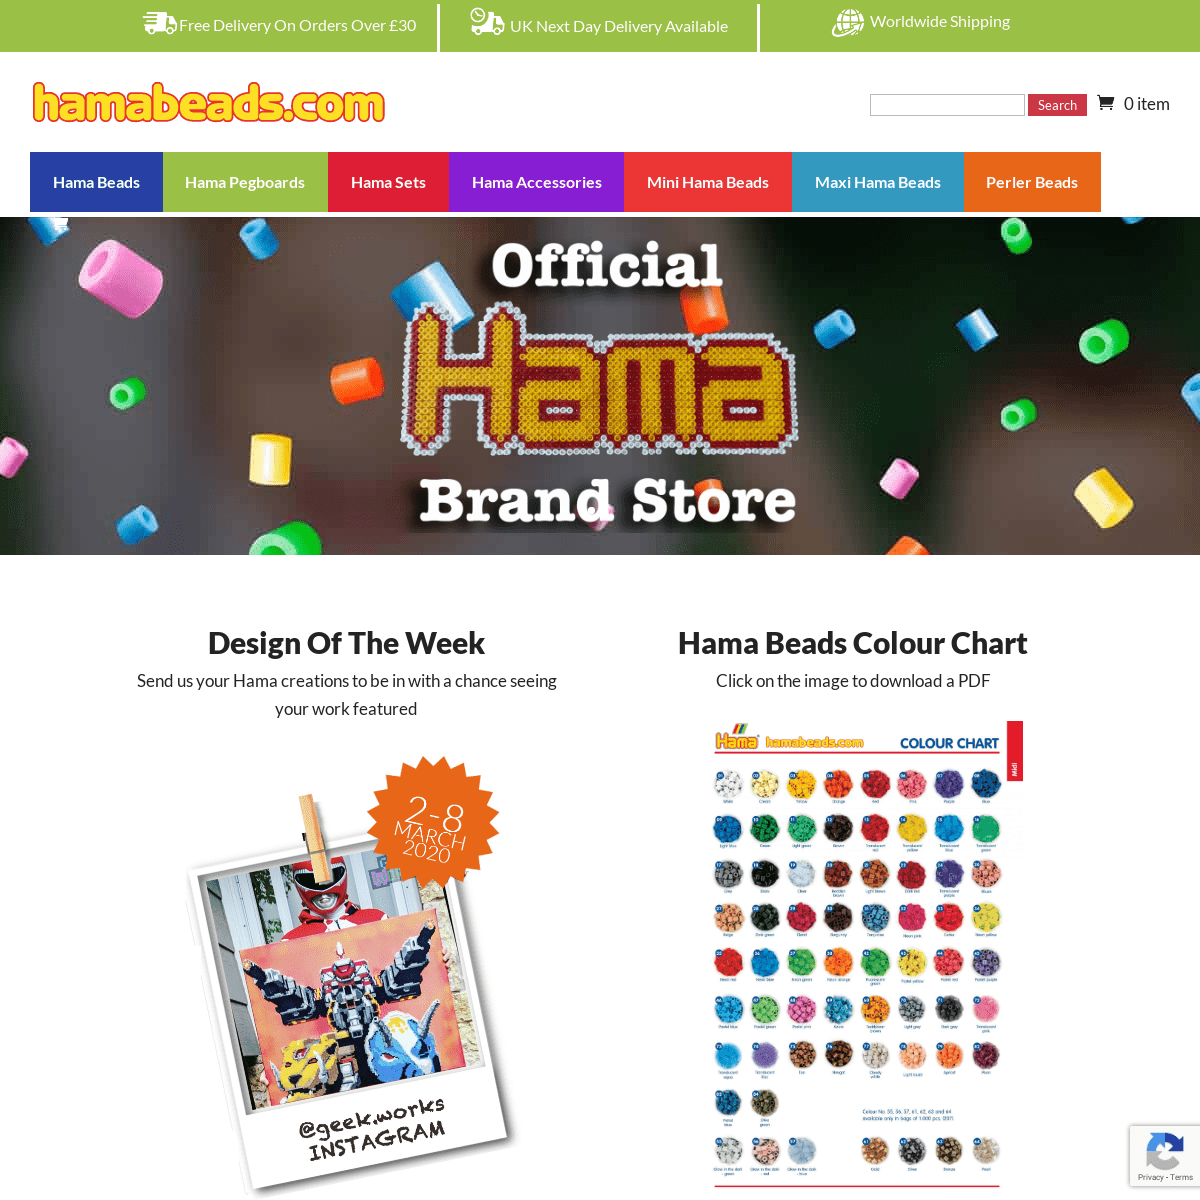 A complete backup of hamabeads.com